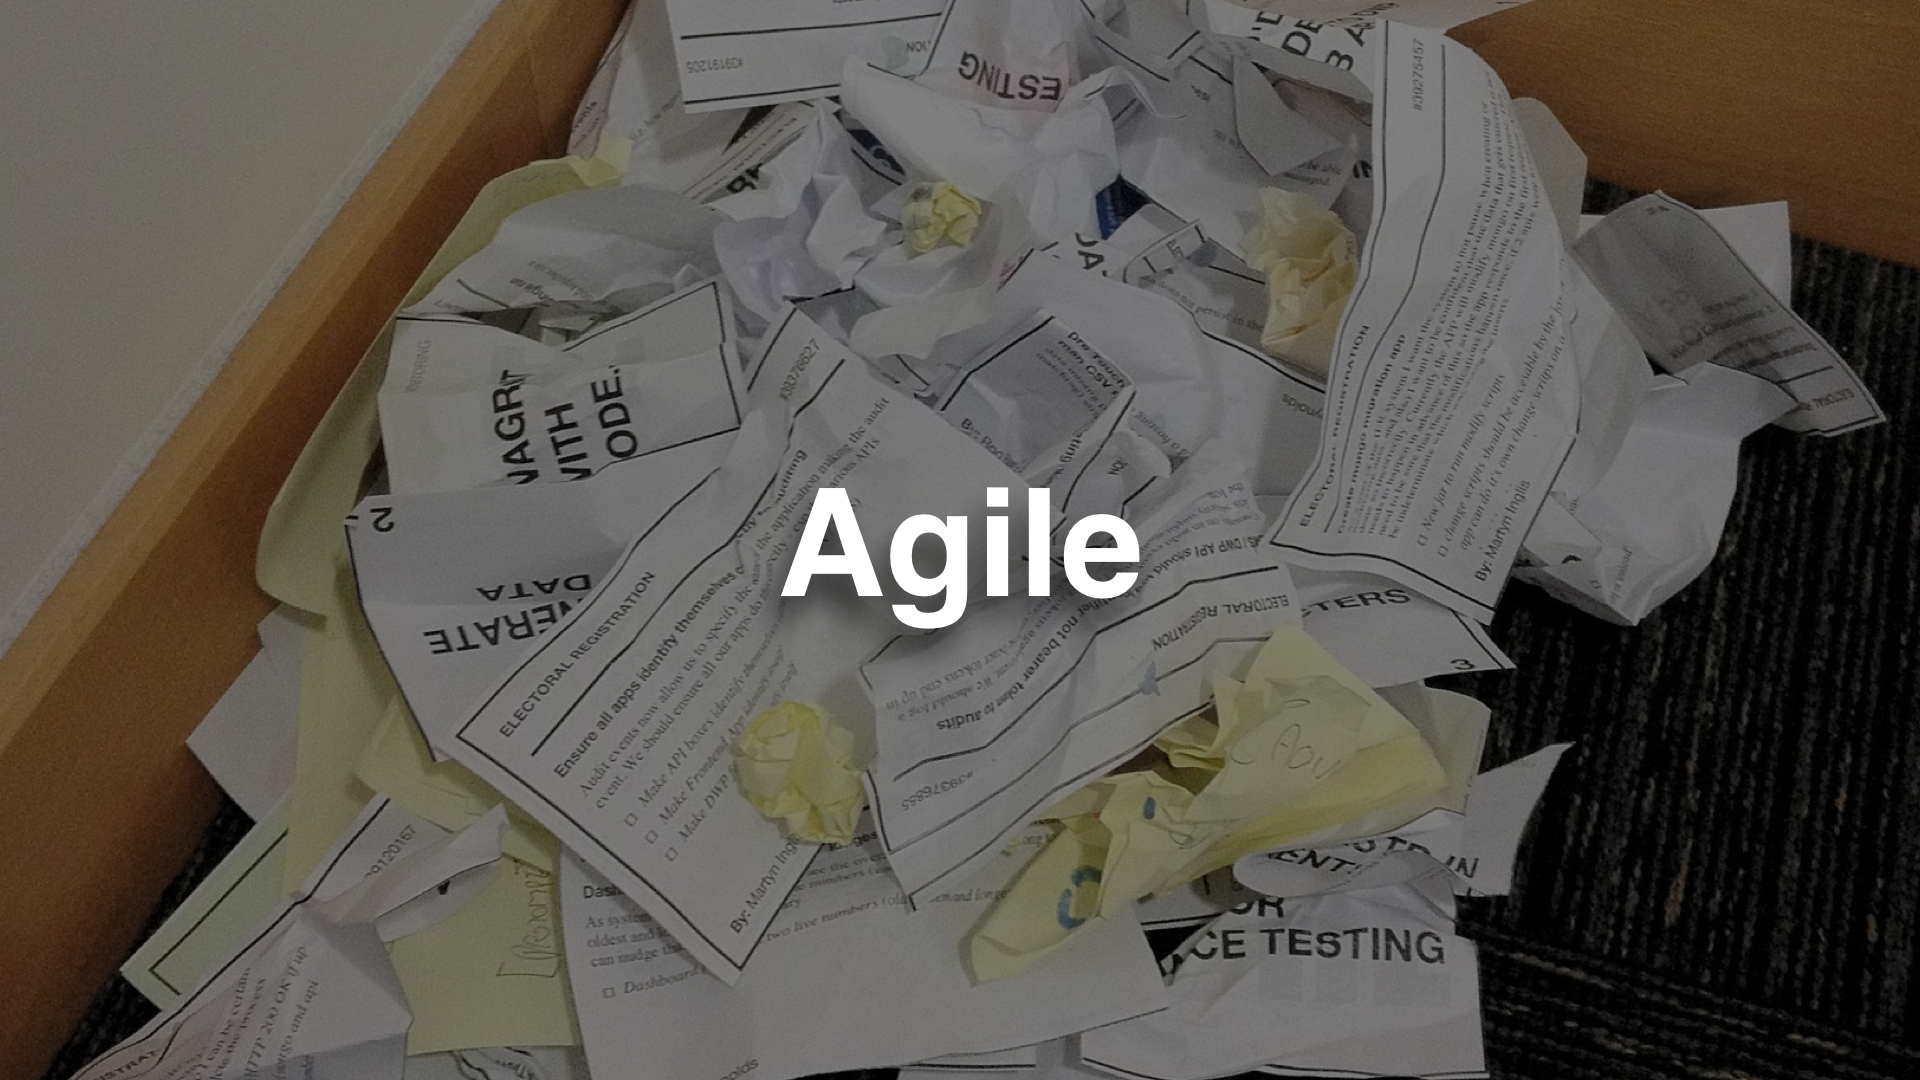 "agile" - photo of a pile of screwed up and discarded paper